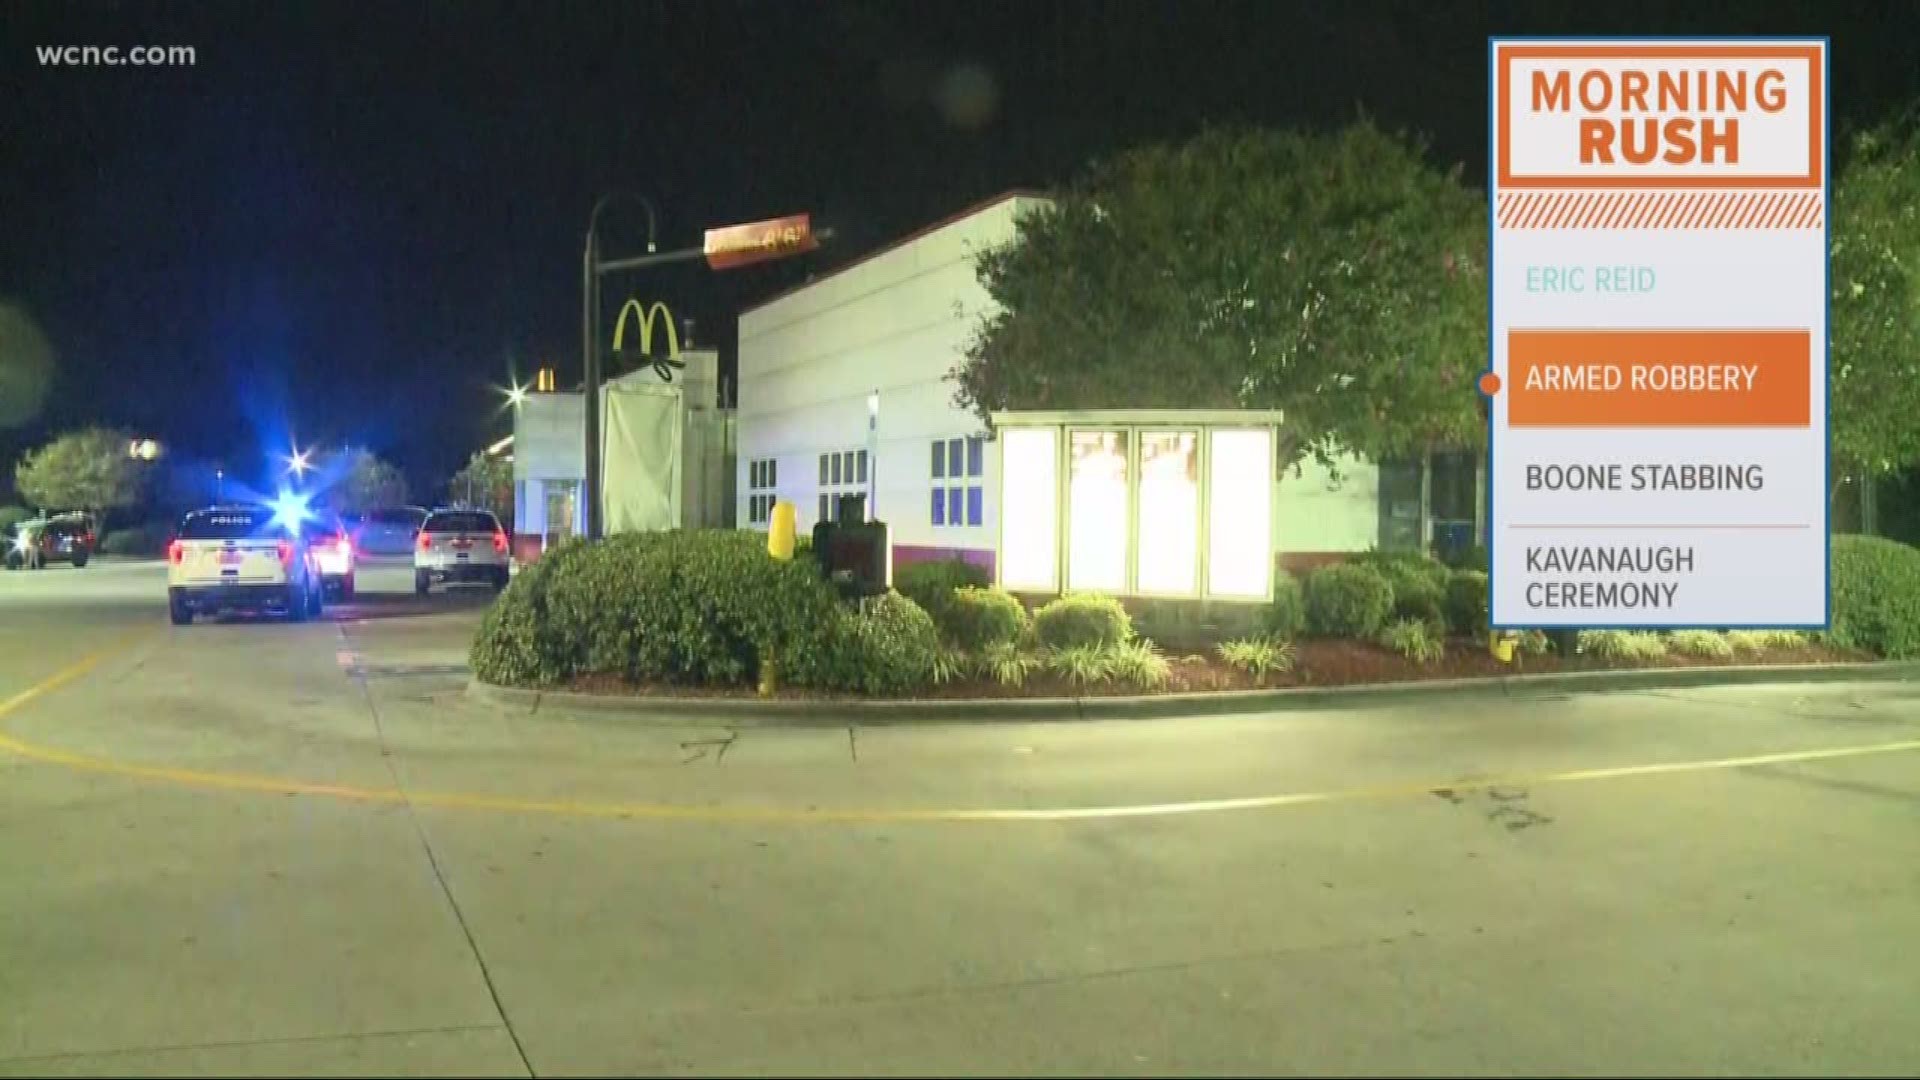 Two people are in custody after an overnight armed robbery at a west Charlotte McDonald's.